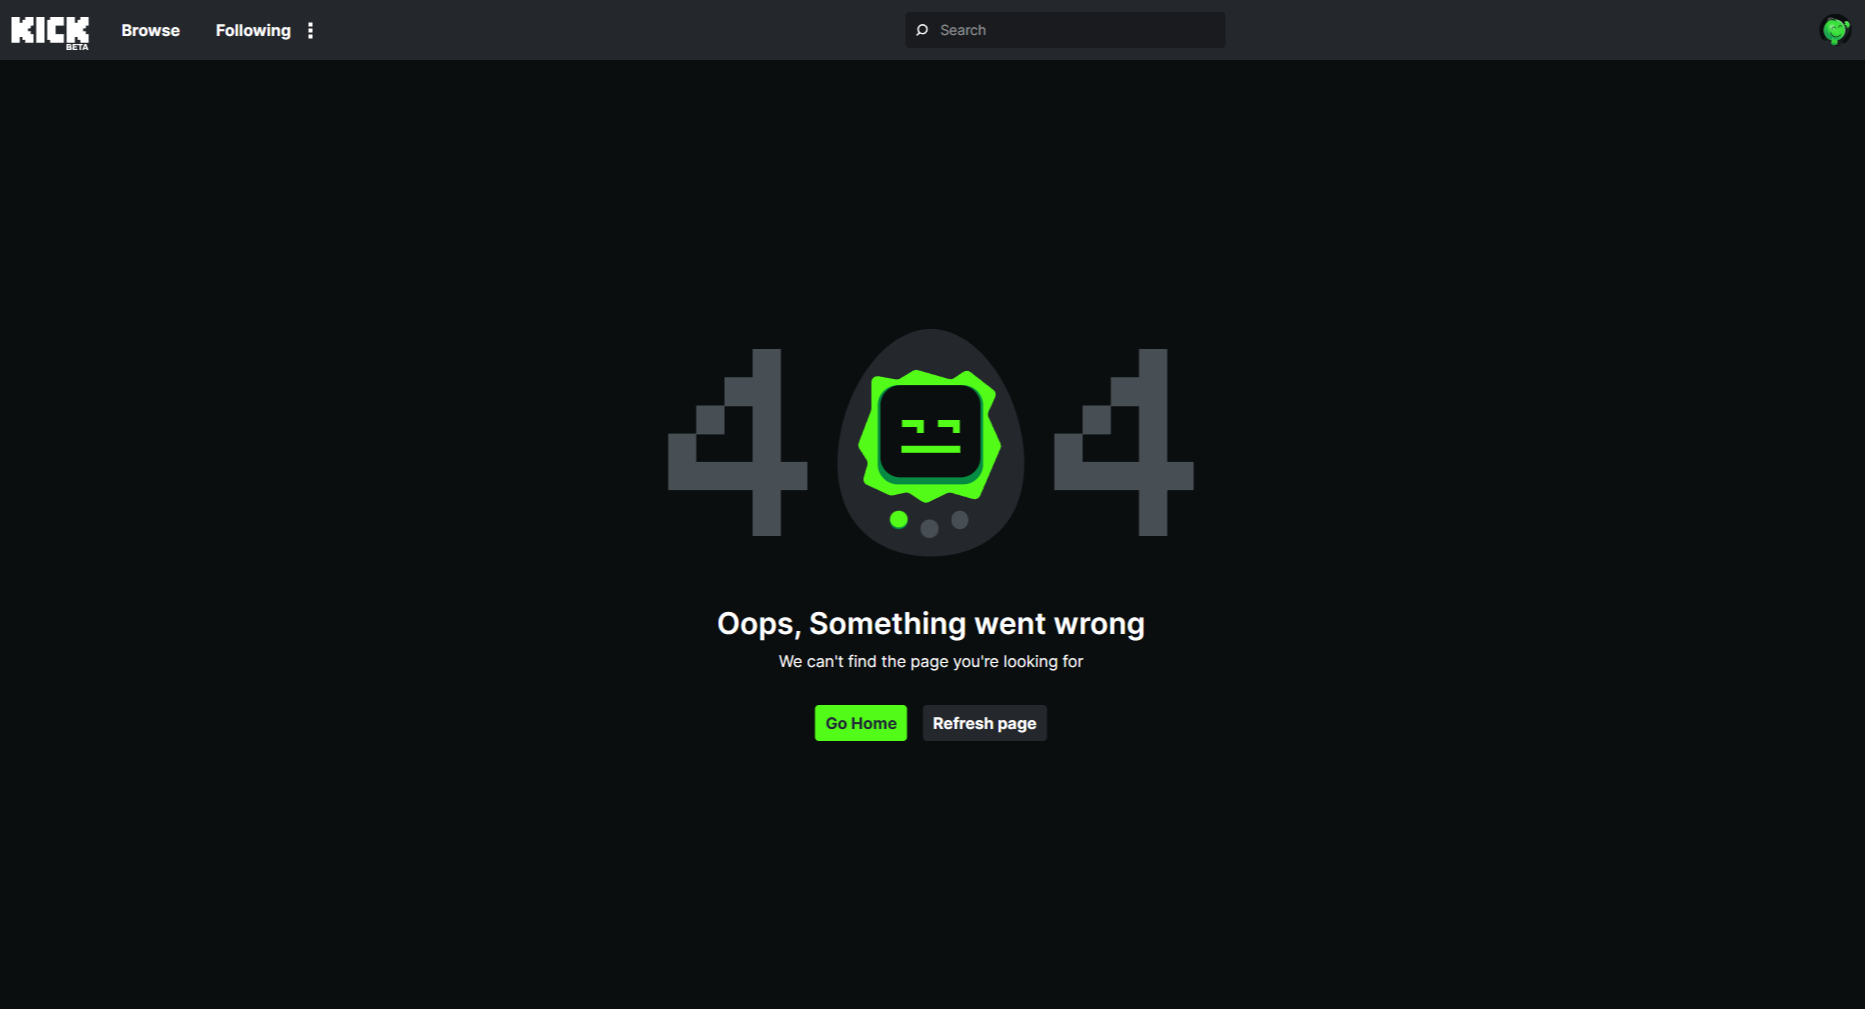 Kick '404. Oops, Something went wrong. We can't find the page you're looking for' error or can’t log in or unable to sign in to Kick website or mobile streaming app